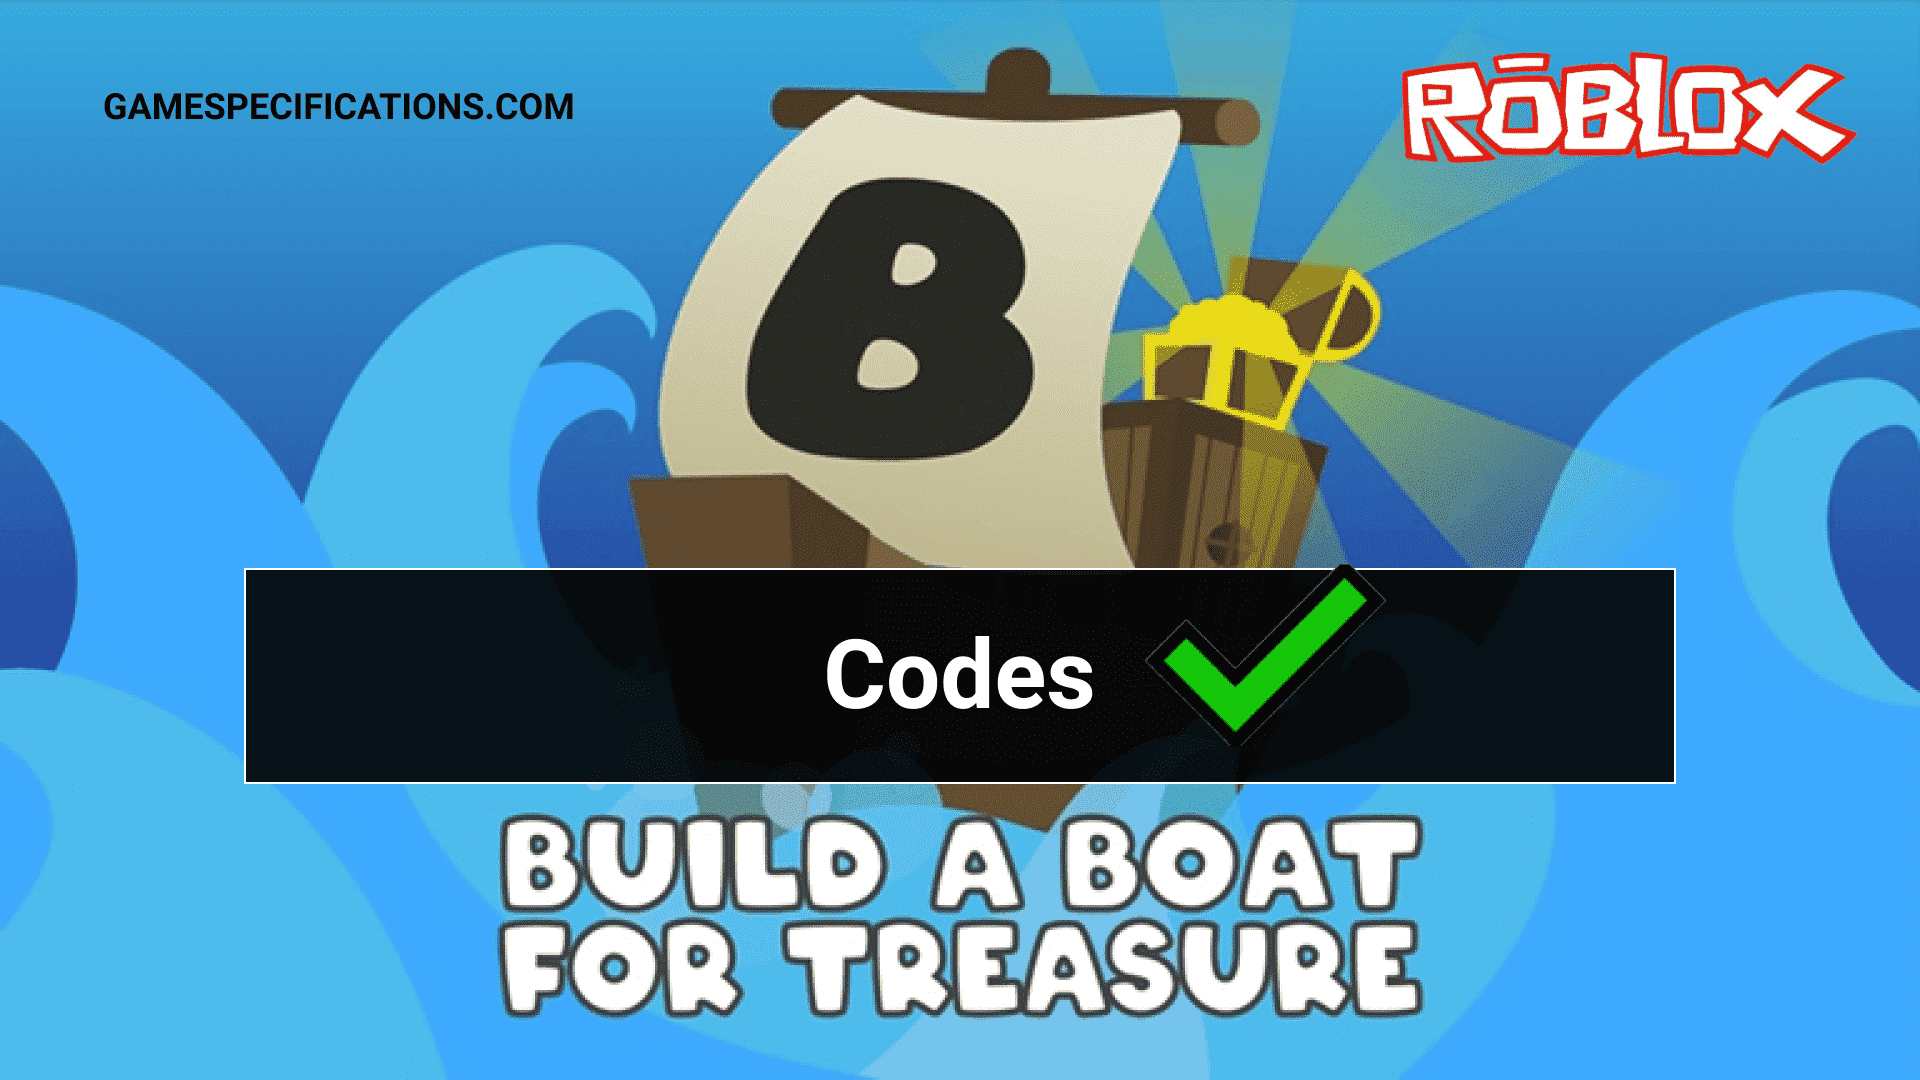 Roblox Build A Boat For Treasure Codes July 2021 Game Specifications - how to build a boat in roblox